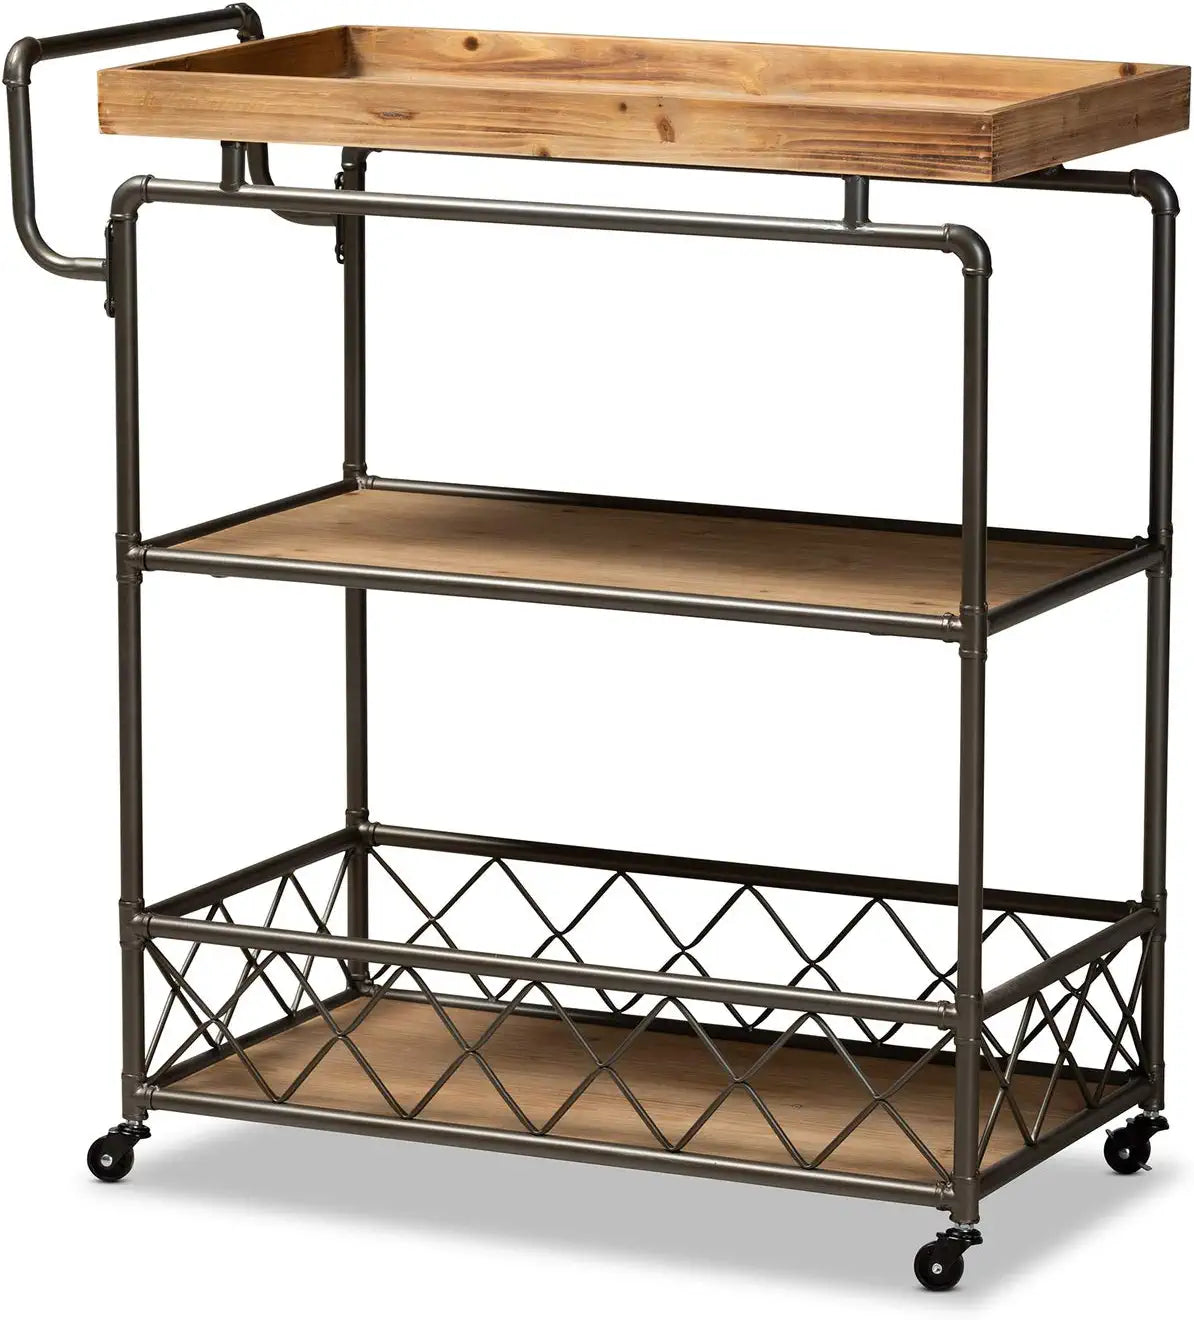 Baxton Studio Amado Rustic Industrial Farmhouse Oak Brown Finished Wood and Black Metal 3-Tier Mobile Kitchen Cart